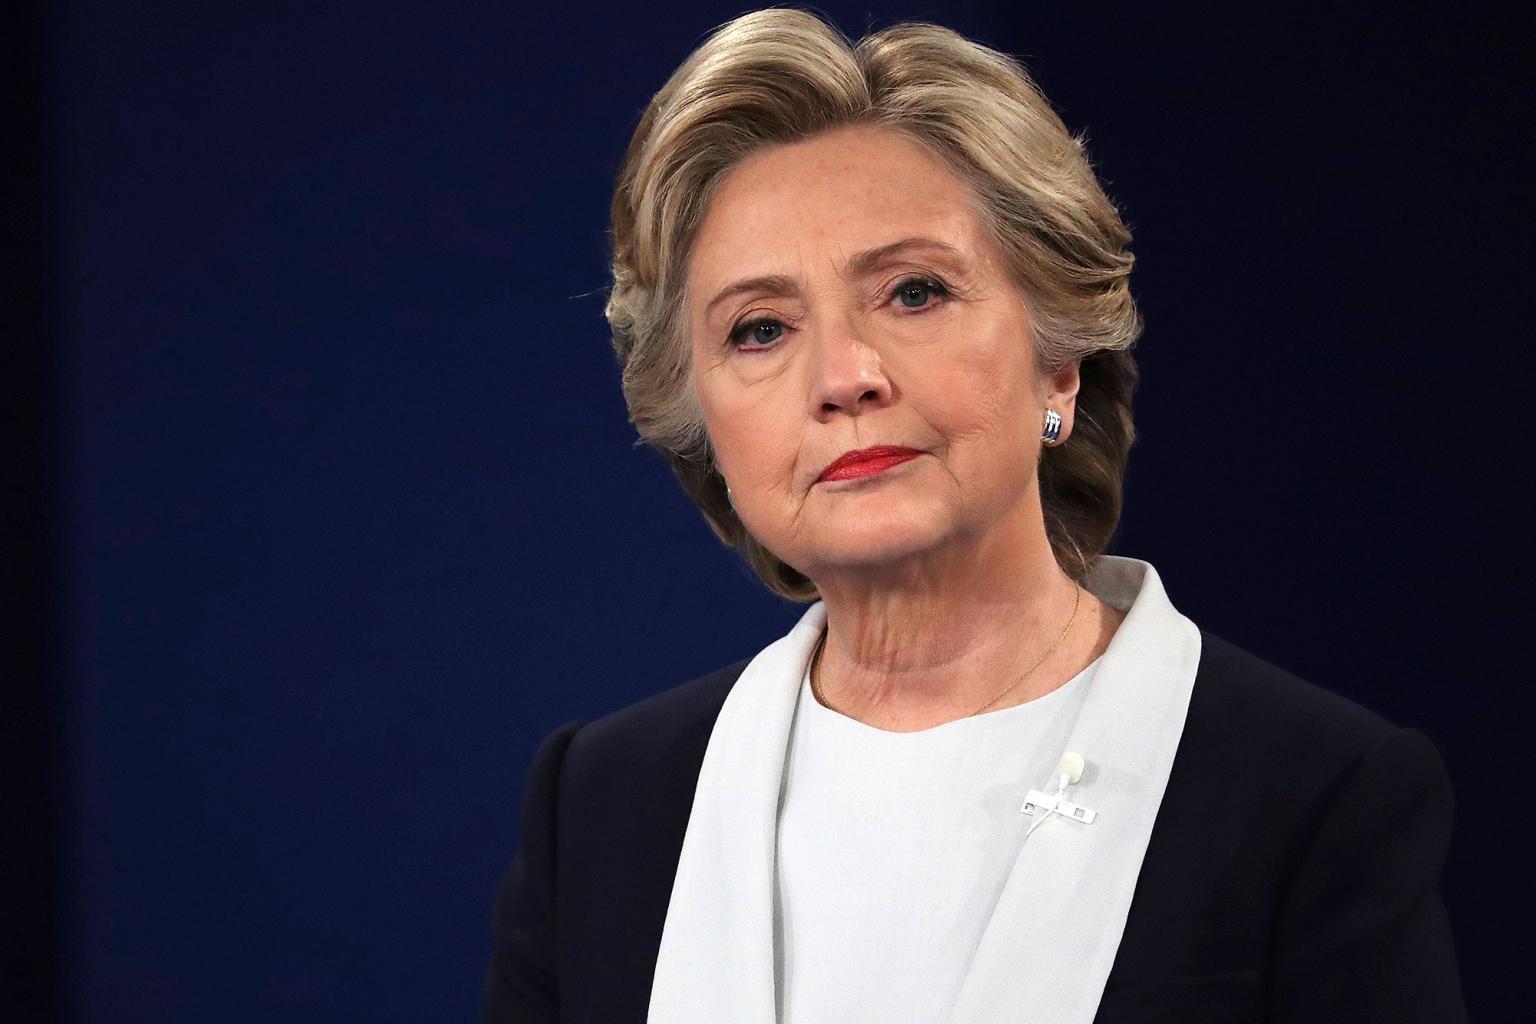 FBIâ€™s October Surprise Not (Yet) a Bombshell with Voters: Hillary Clinton Still Leads in Latest Poll